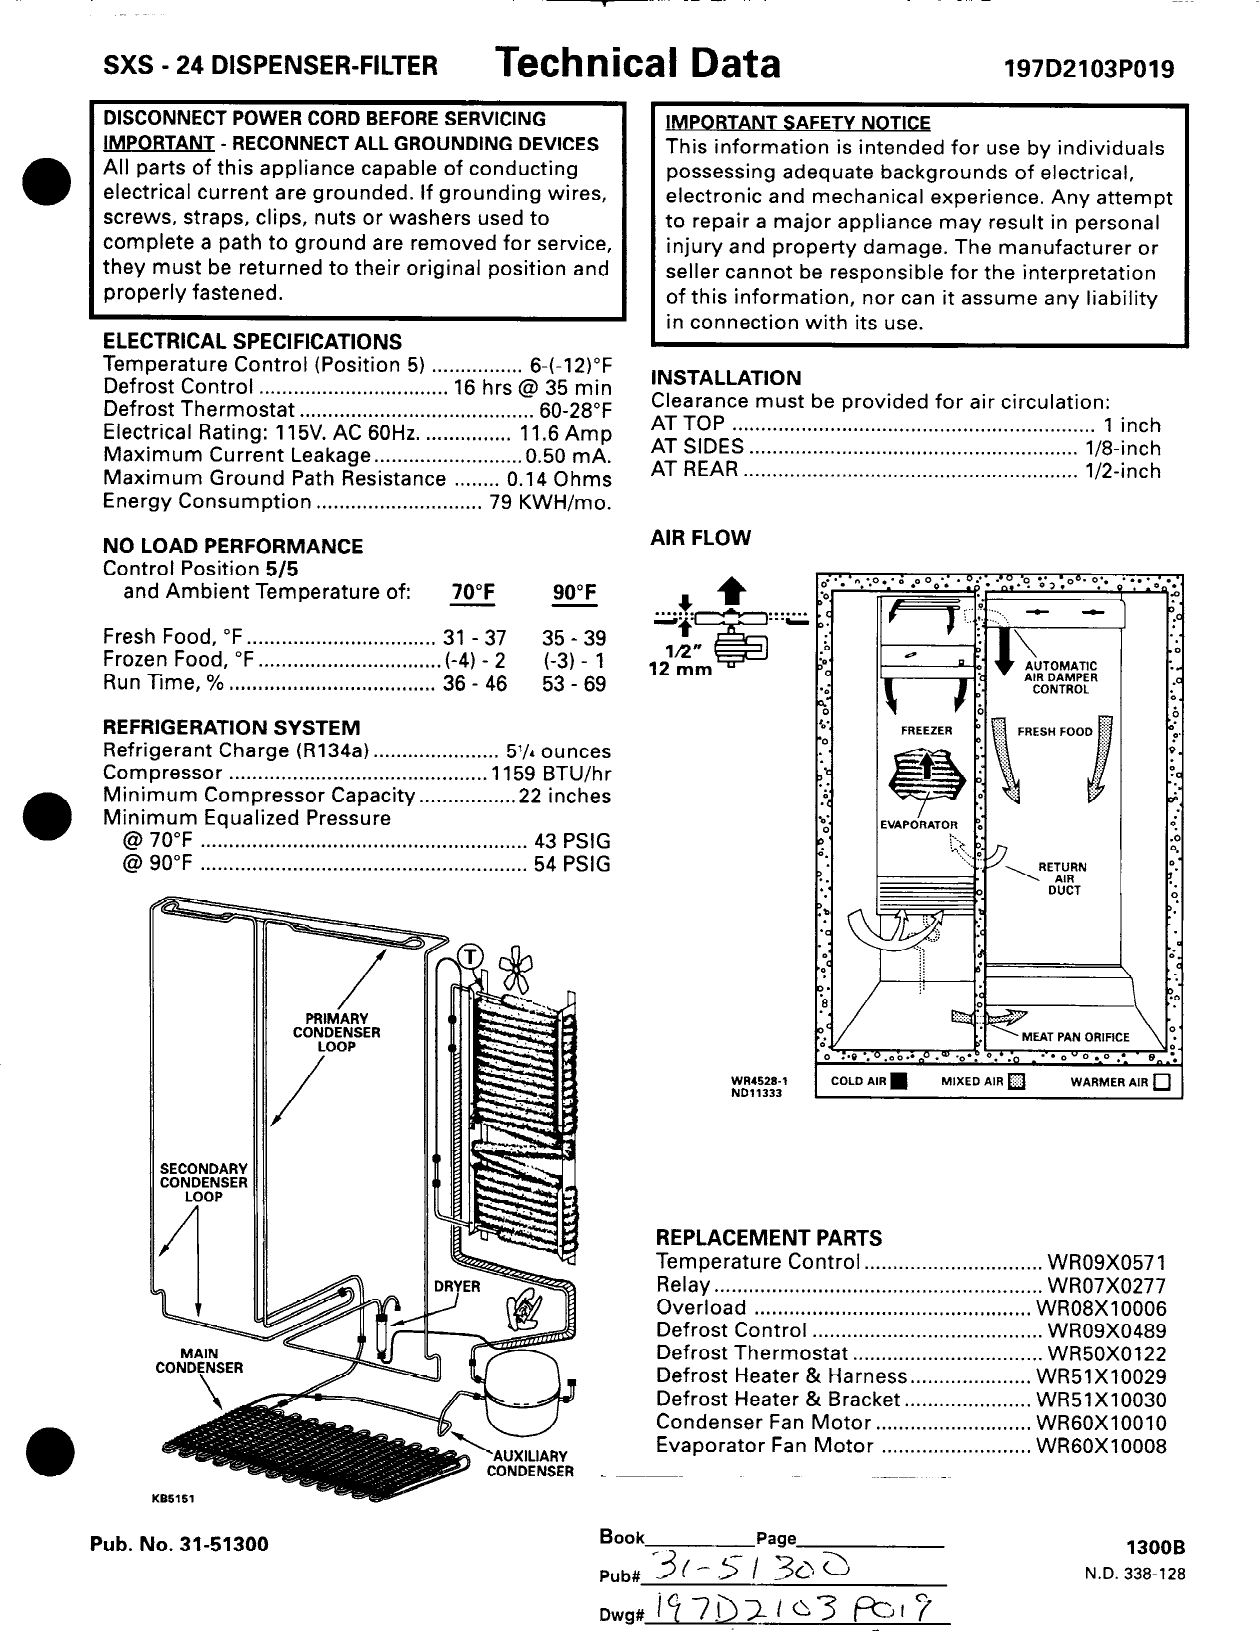 Page 2 of 2 - 31-51300.max  GE Refrig - Tech Sheet 31-51300